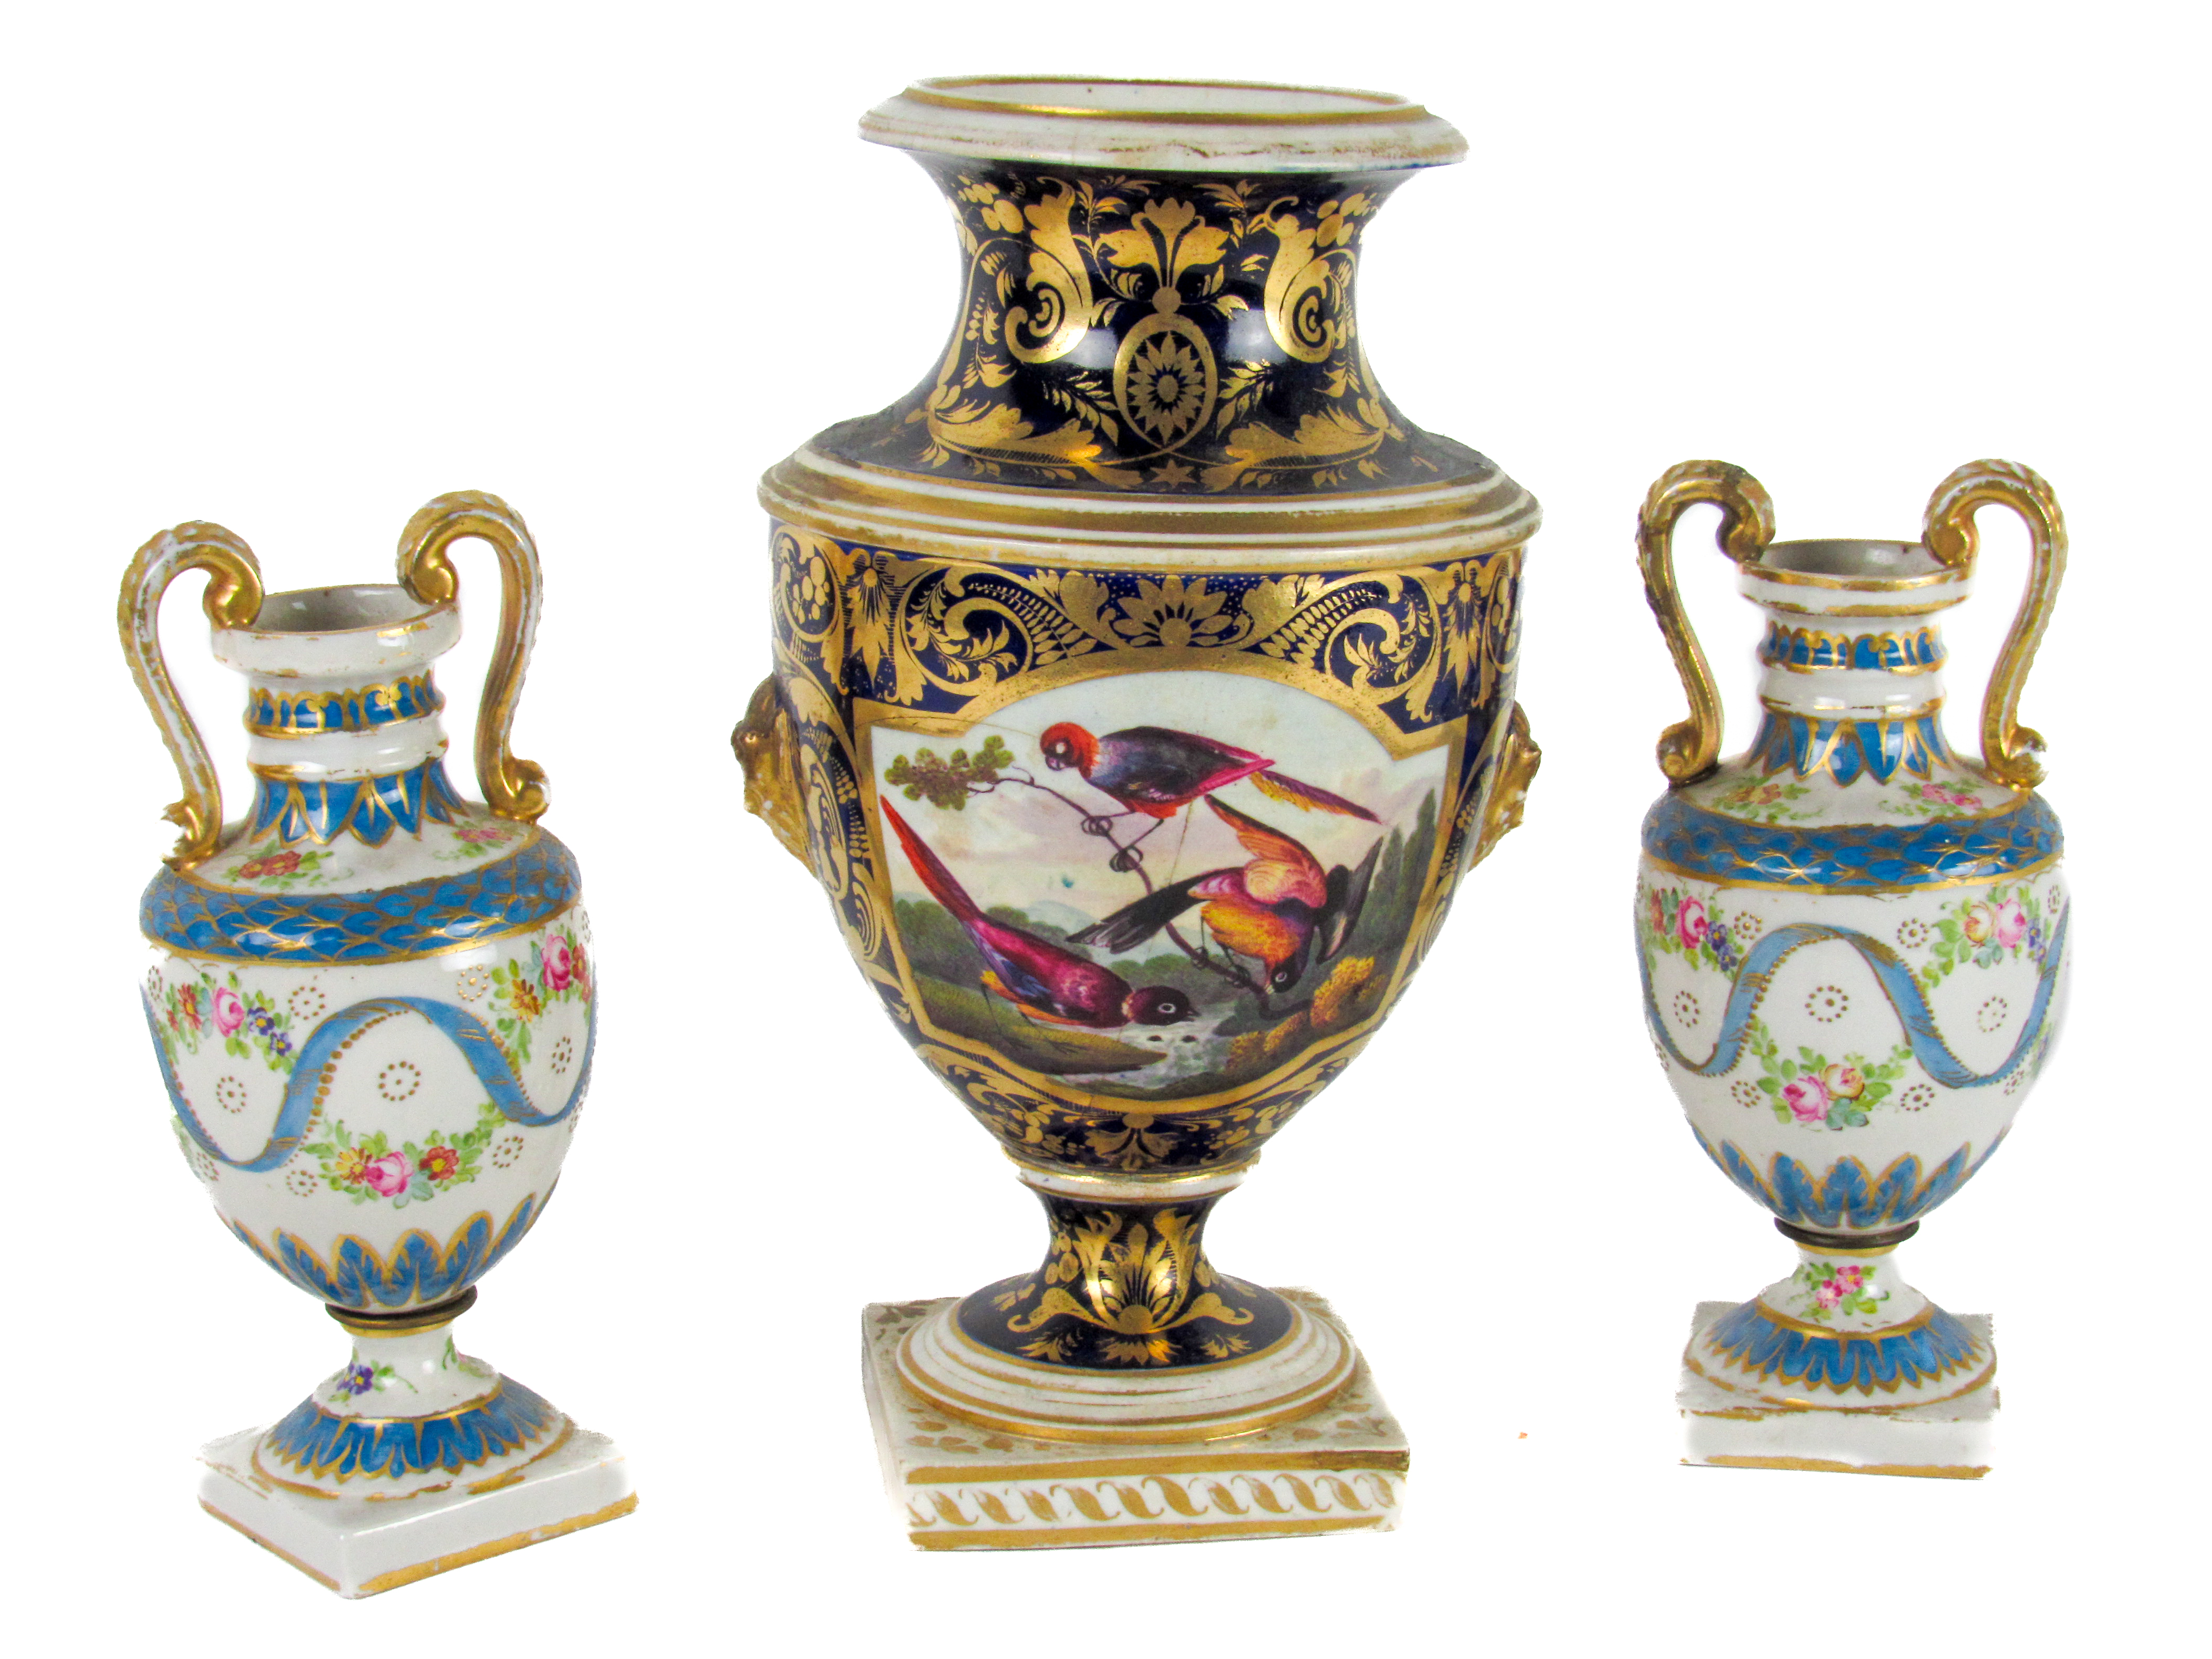 A pair of attractive 19th Century Meissen porcelain two handled hand painted and gilt highlighted